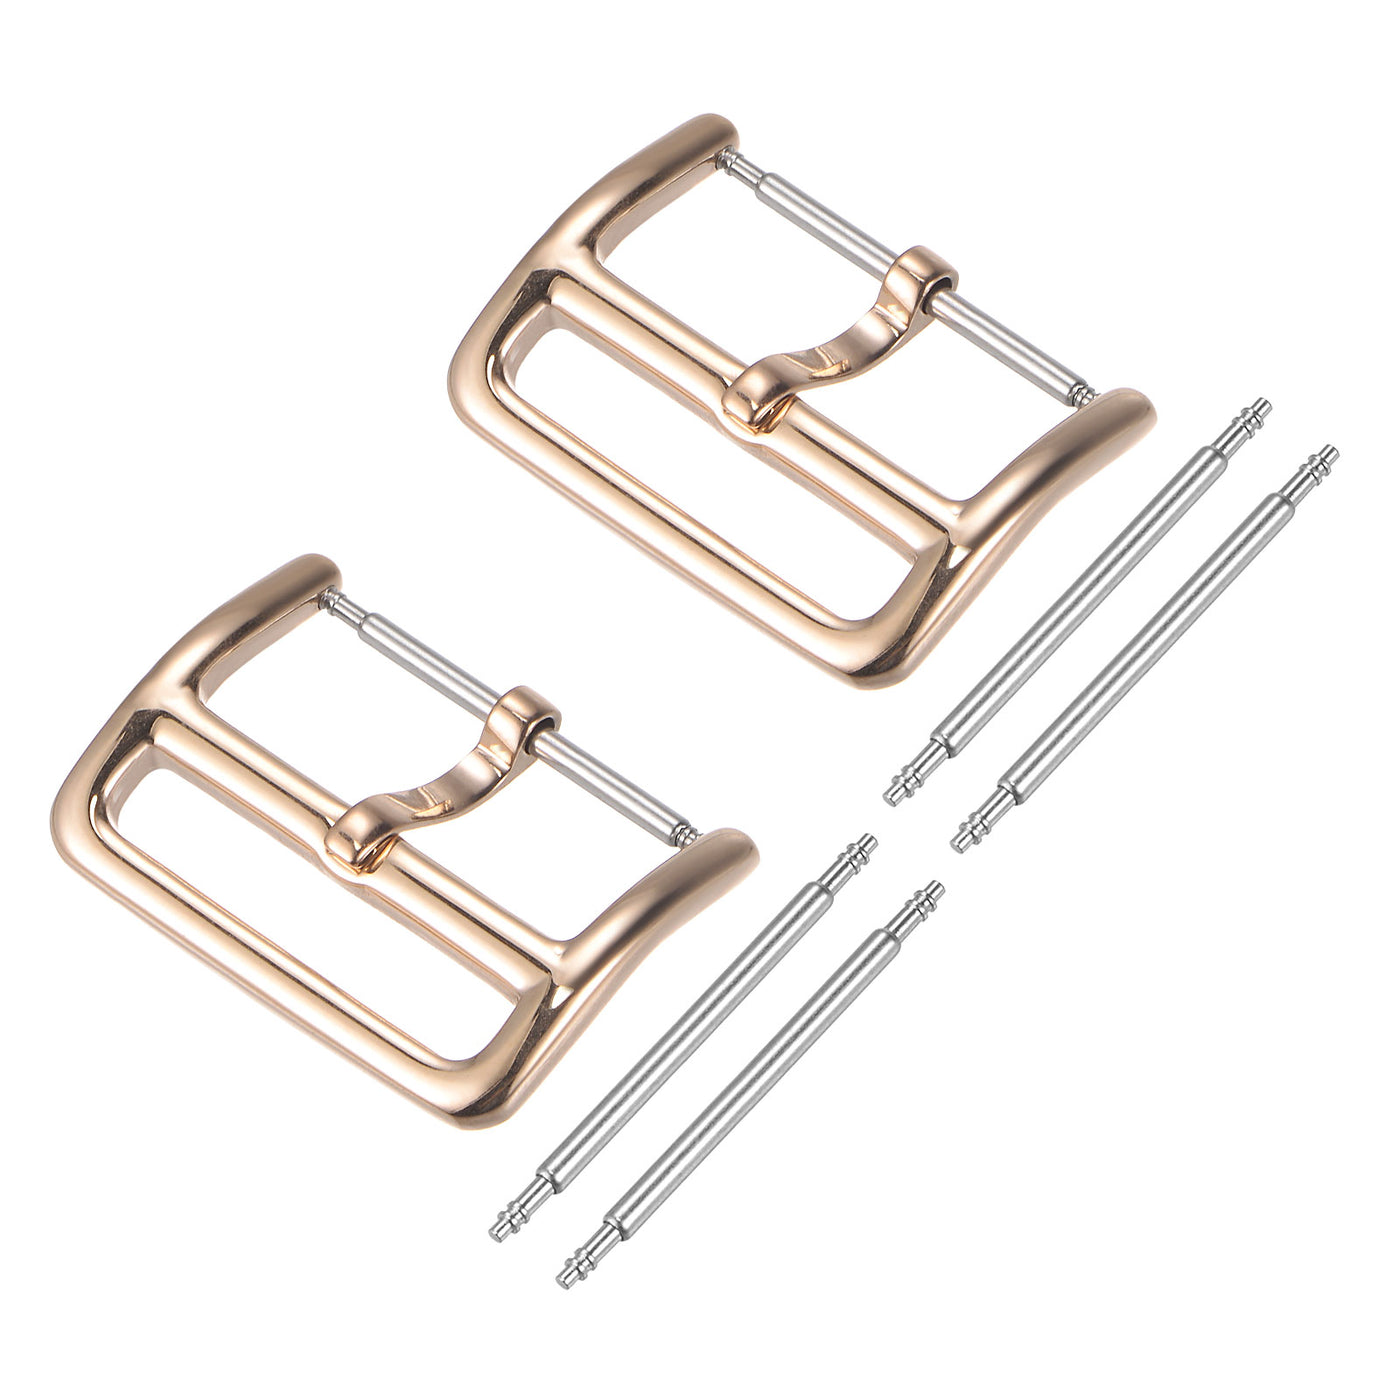 Uxcell Uxcell Watch SUS304 2 Pcs Rose Gold Tone Buckle for 14mm Watch Bands W 4Pcs Spring Bar